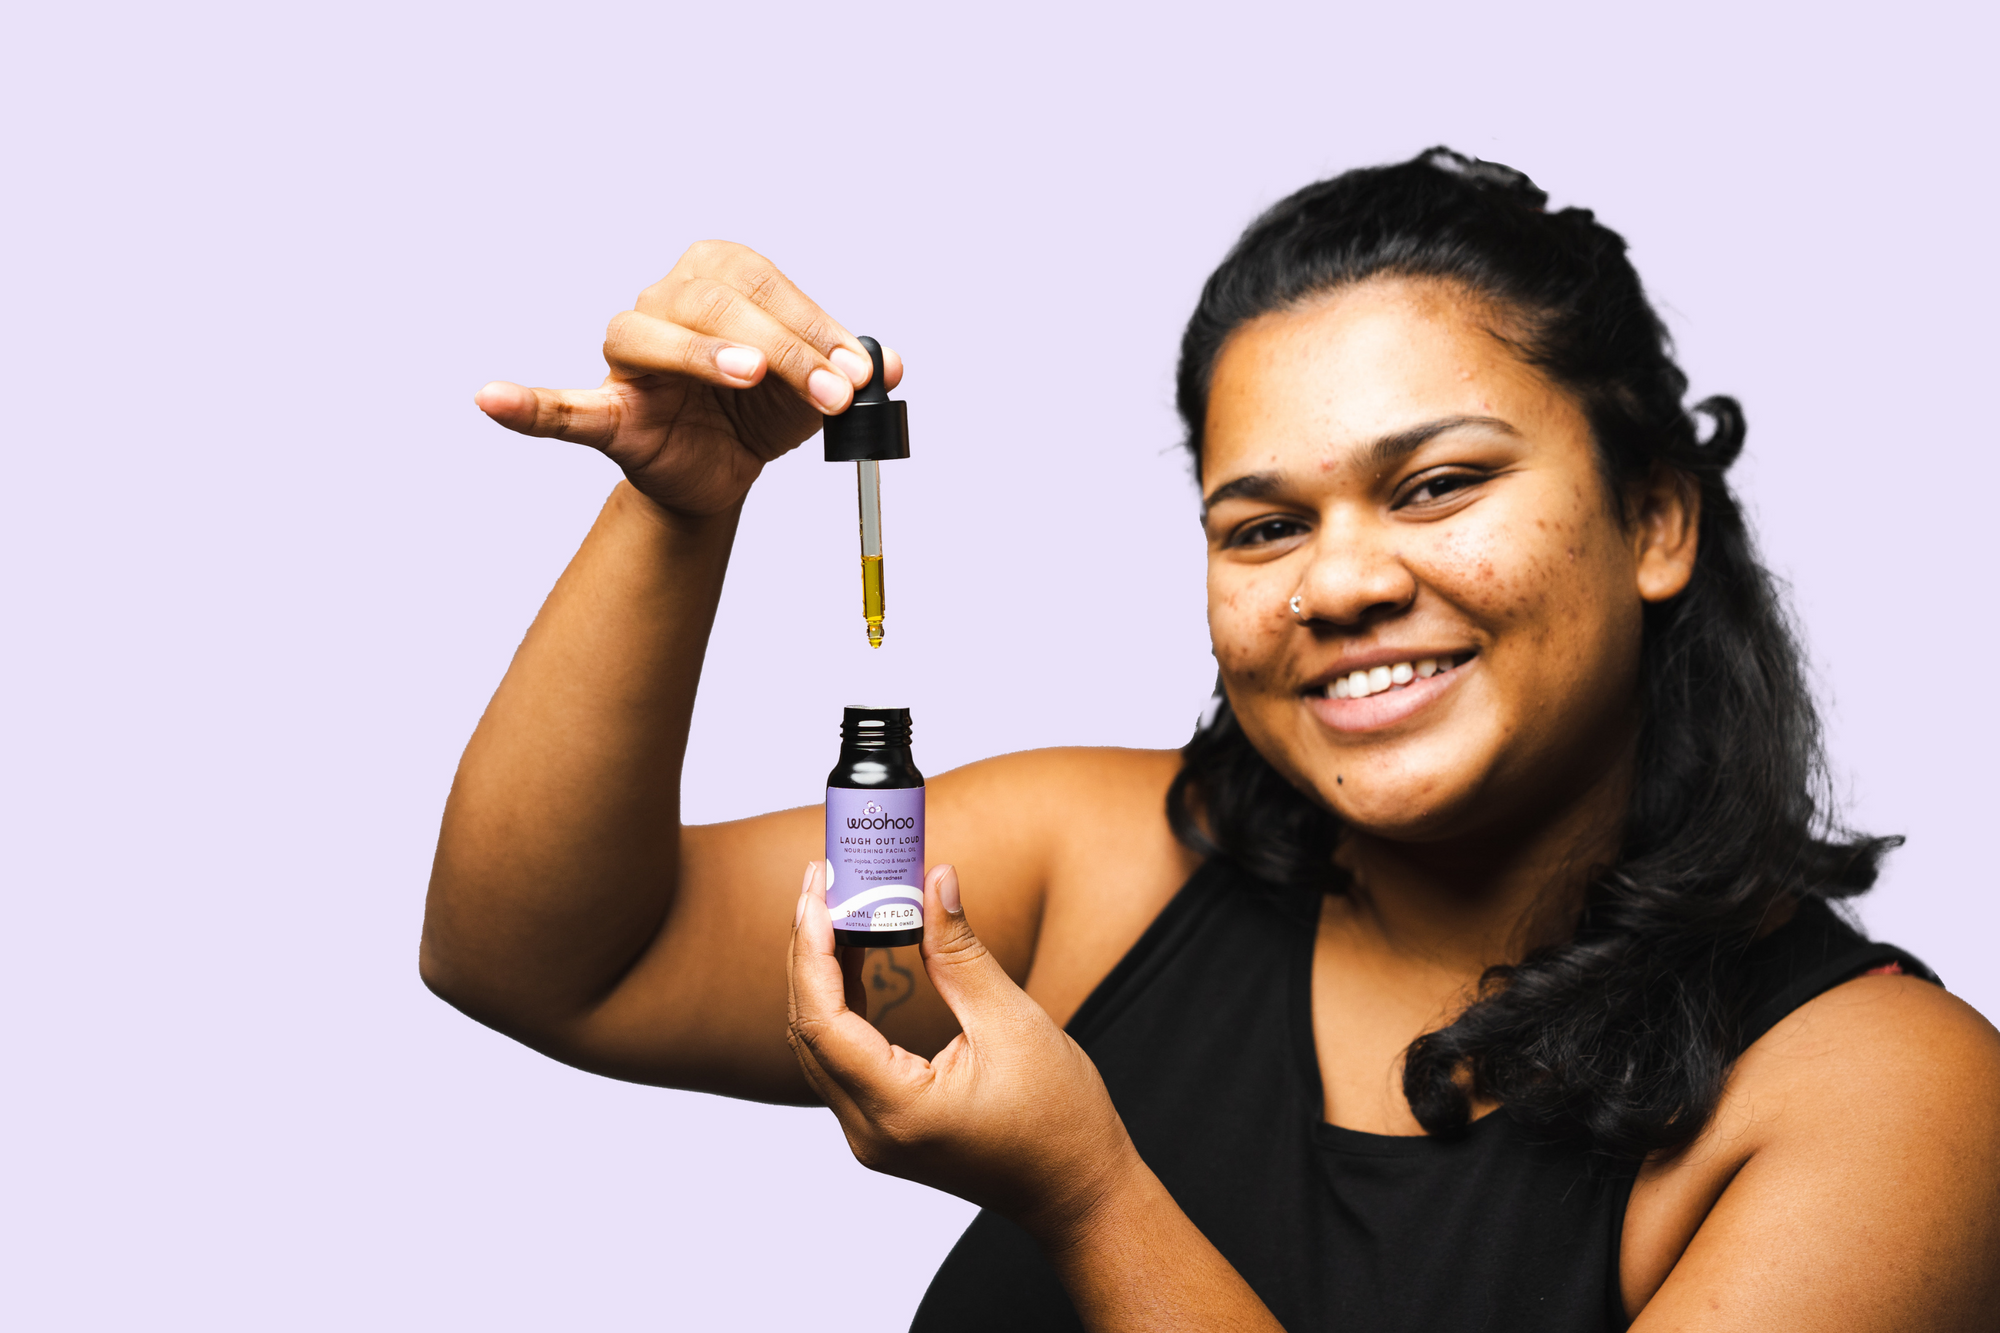 How to use your 'Laugh Out Loud' Nourishing Facial Oil